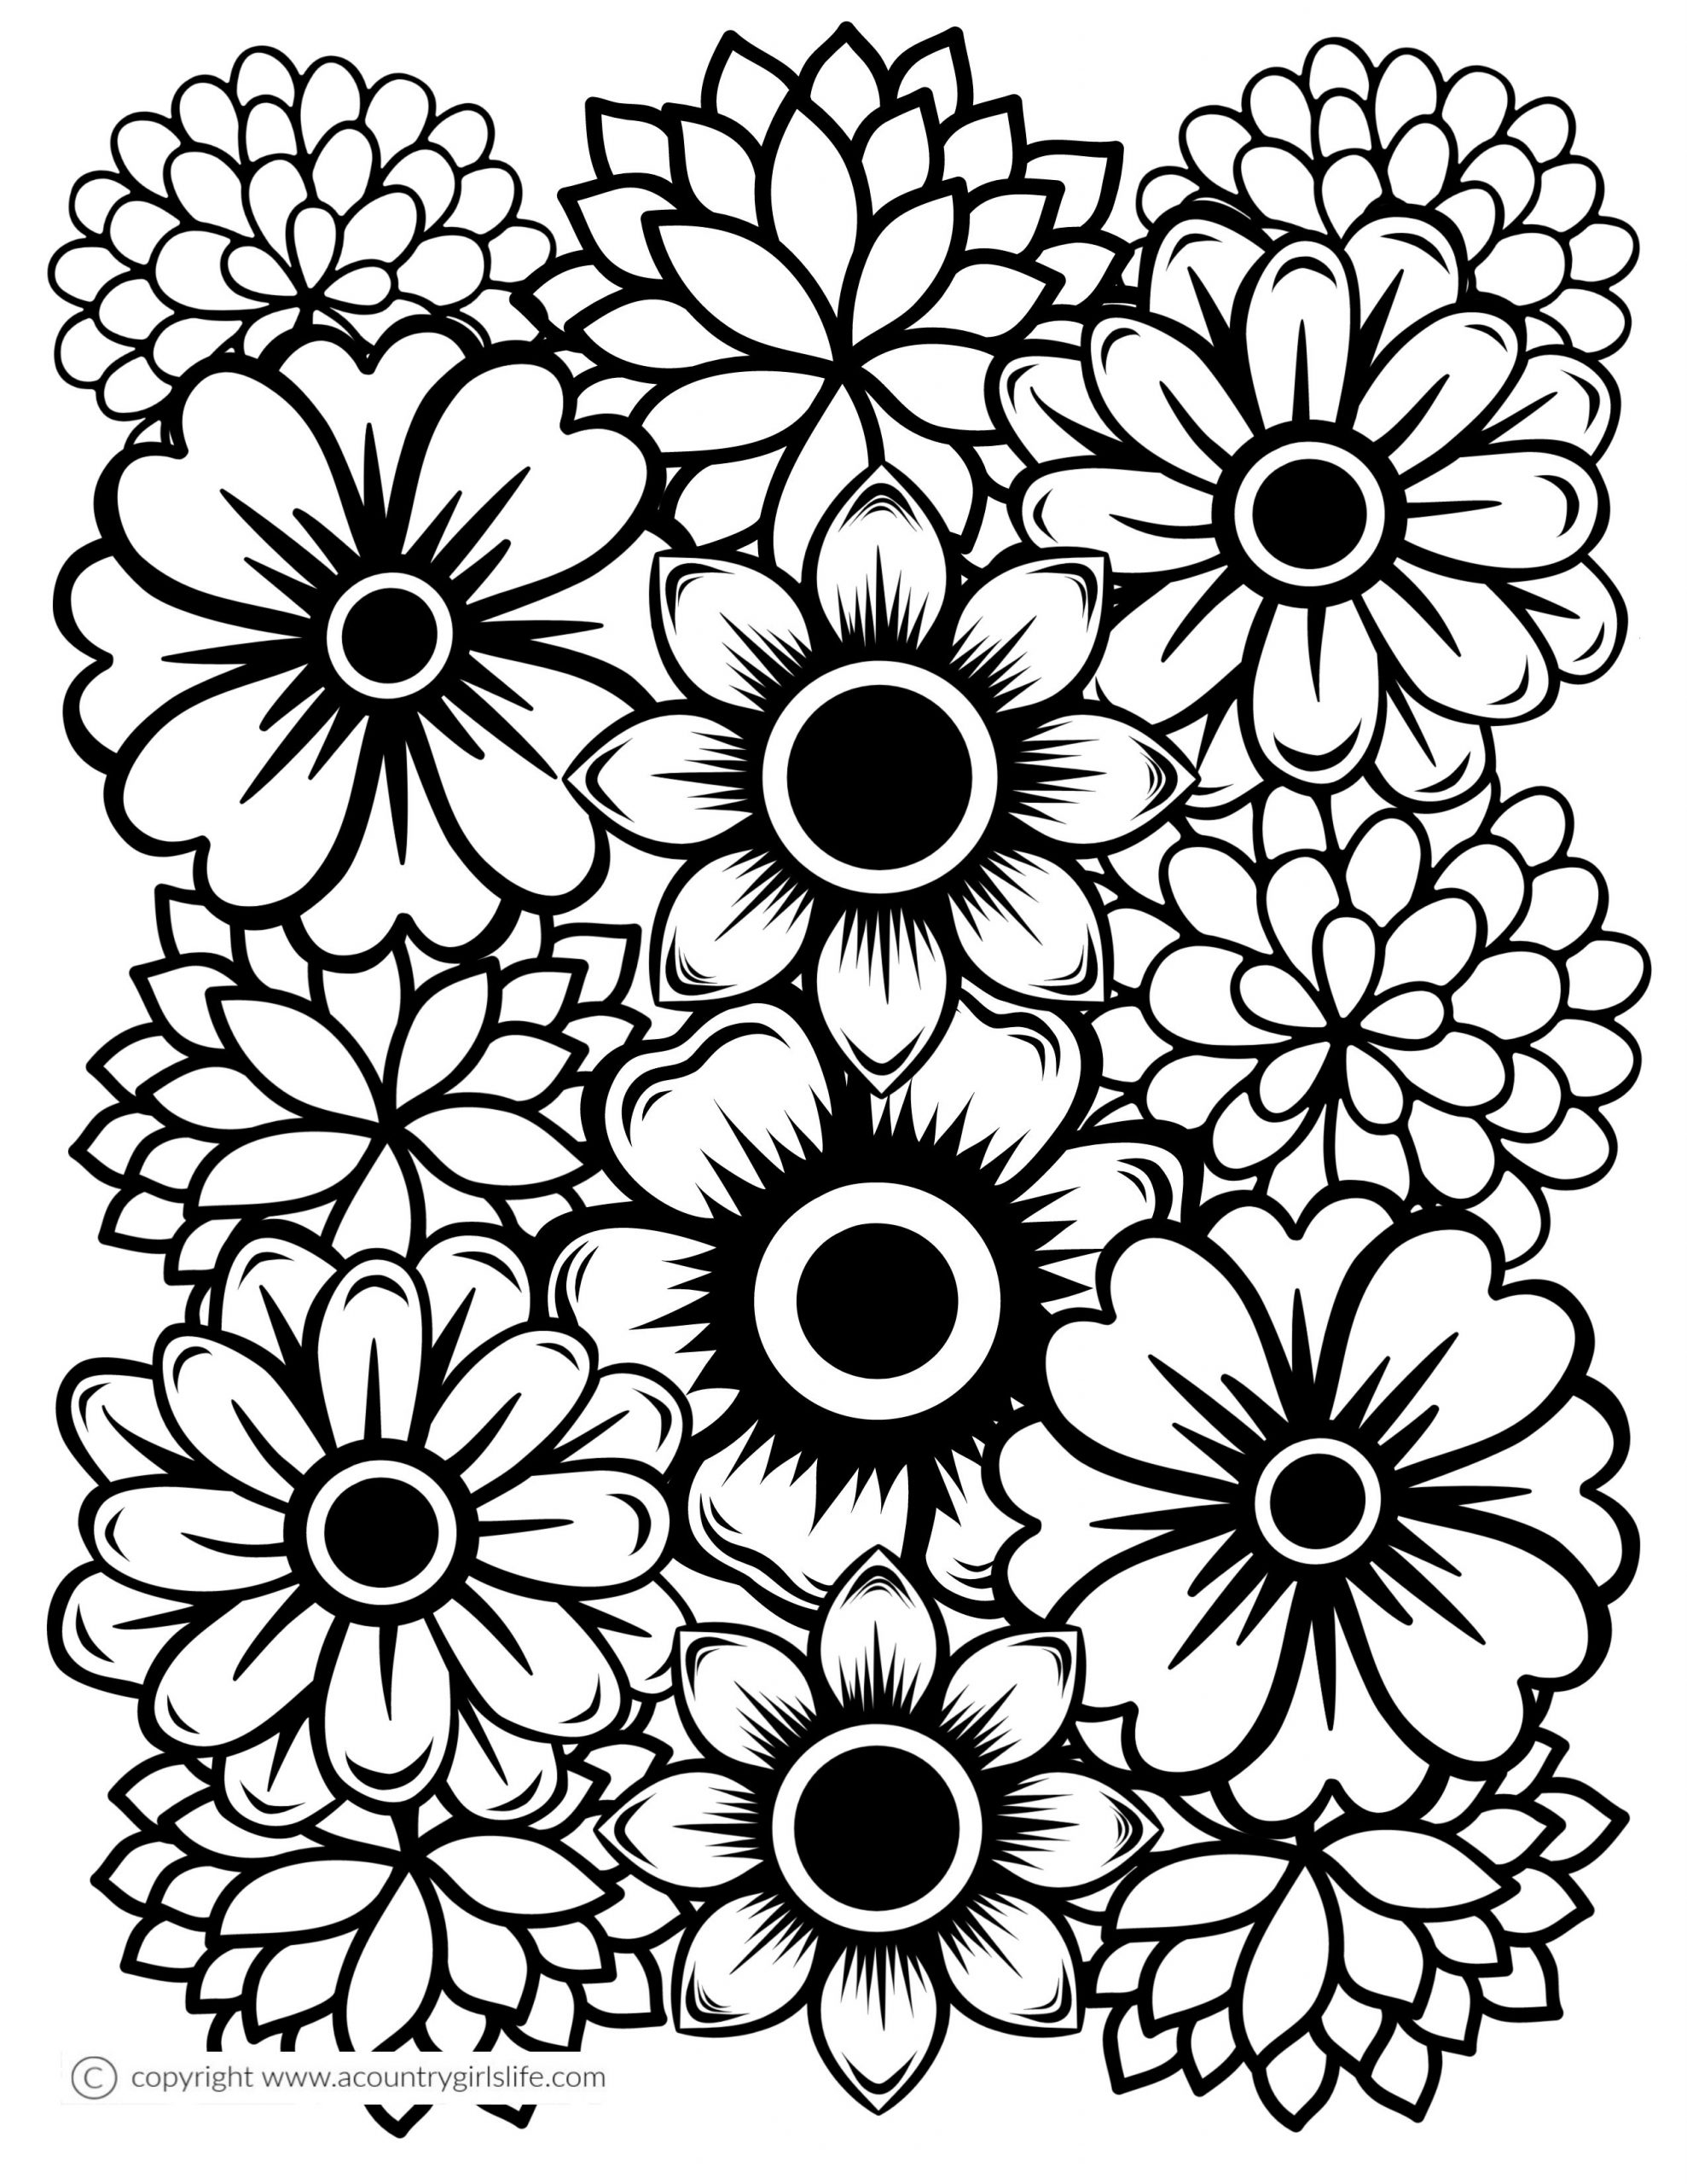 Printable Free Coloring Pages Flowers - Image to u